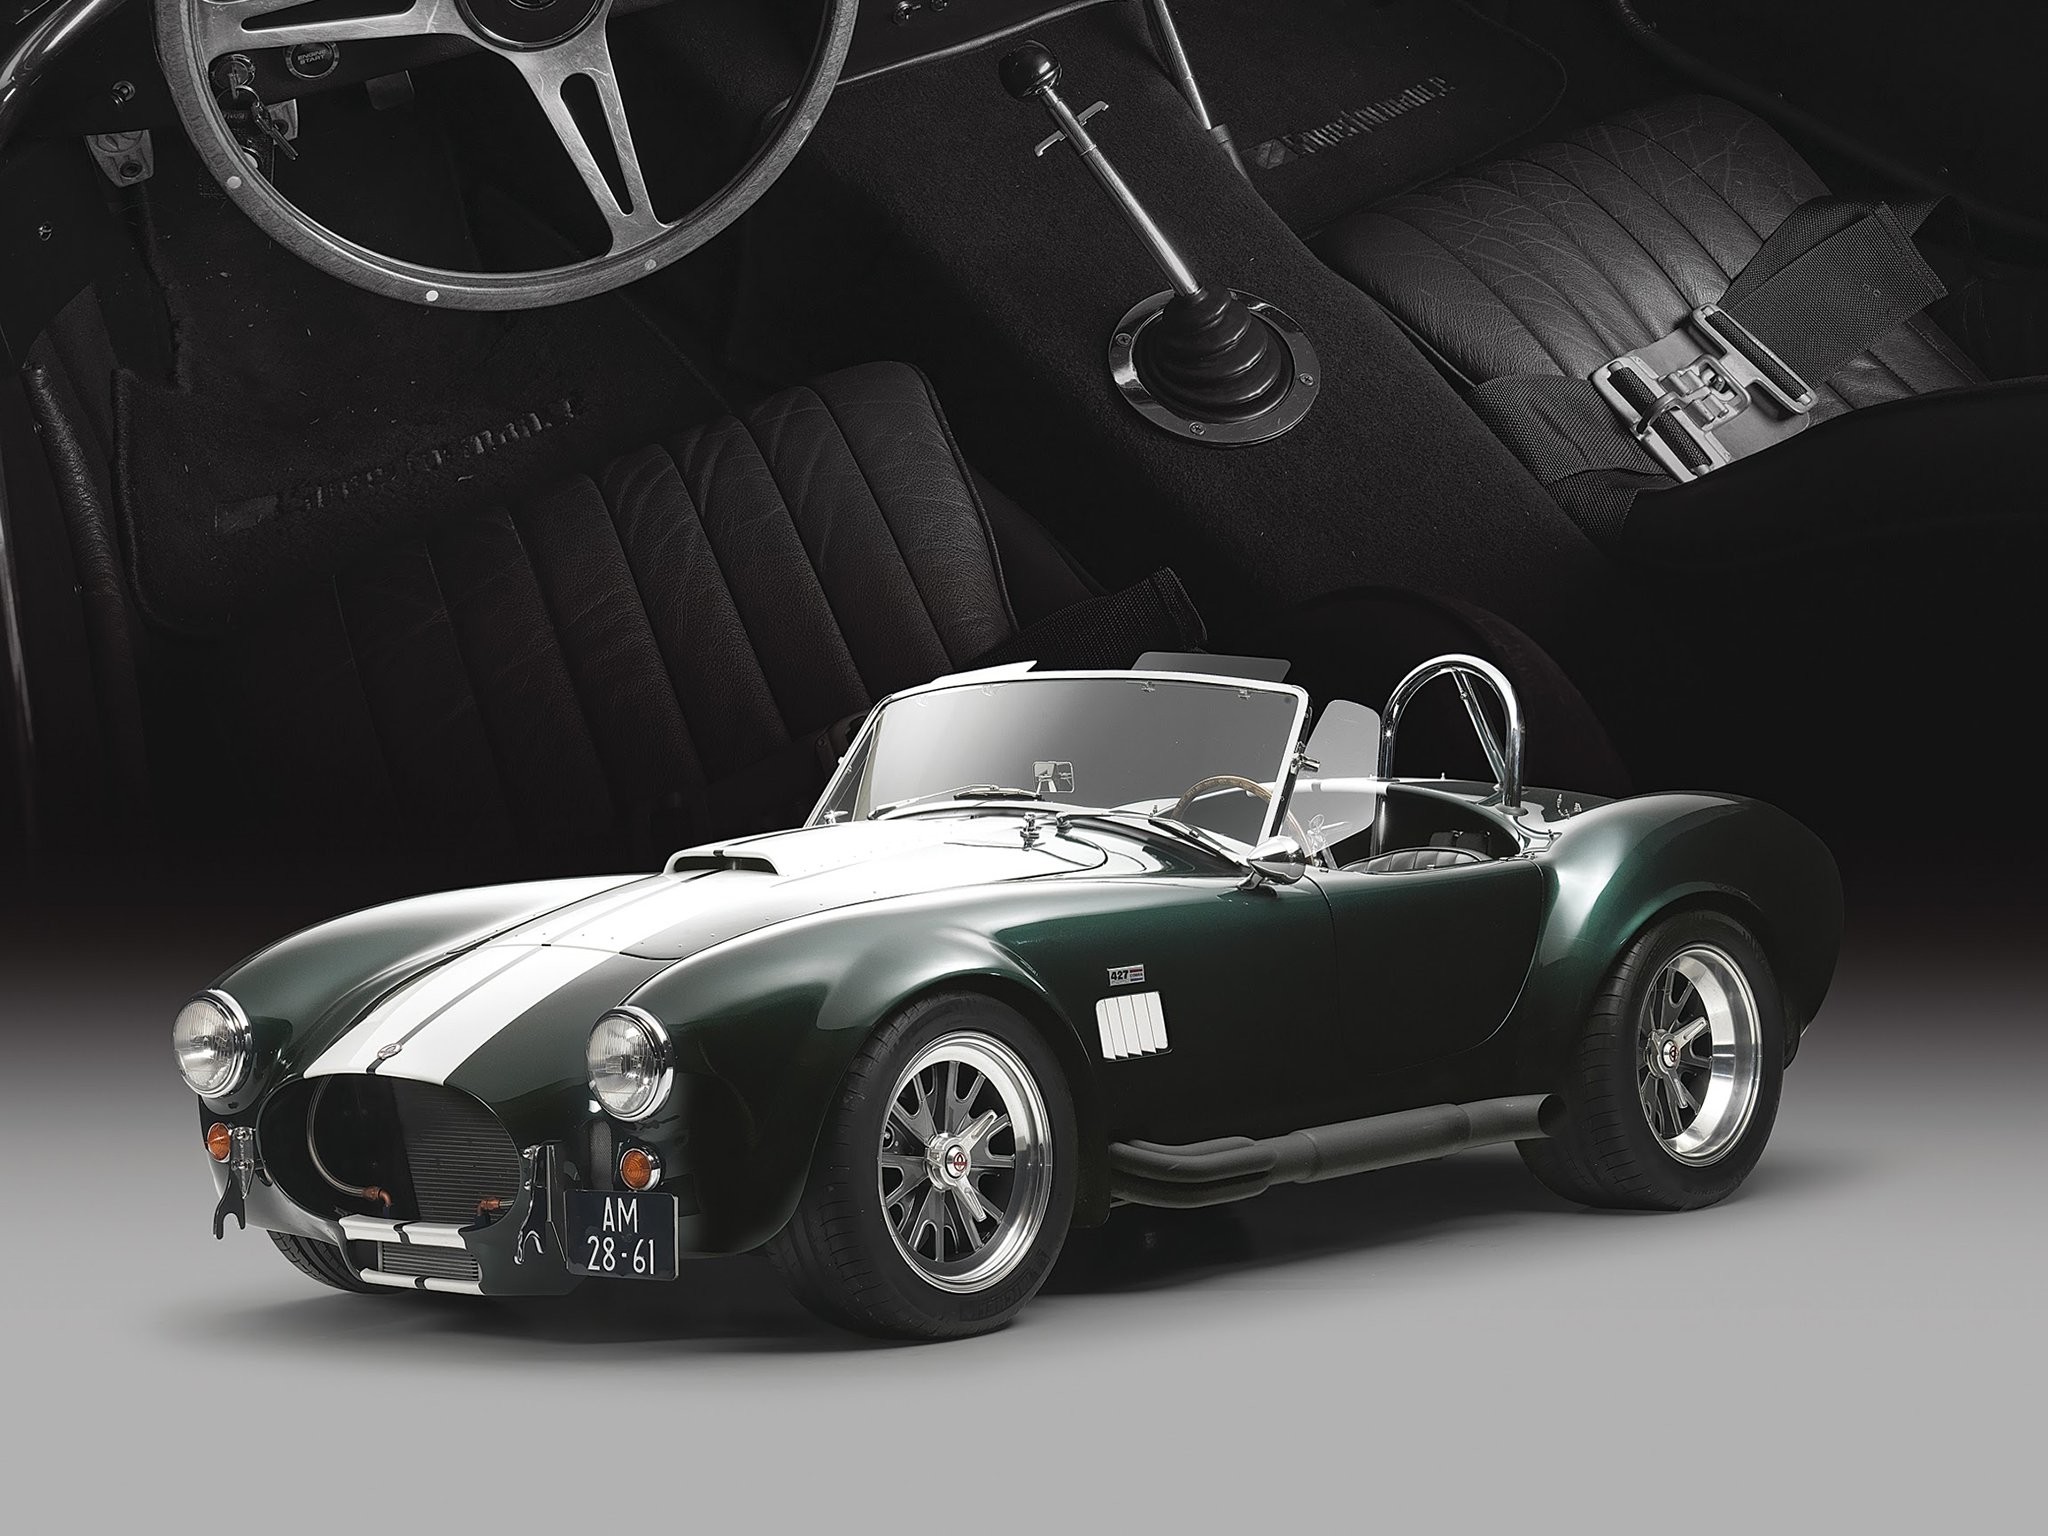 2048x1536 1965 Shelby Cobra 427 MkIII supercar hot rod rods muscle classic g wallpaper  |  | 298150 | WallpaperUP